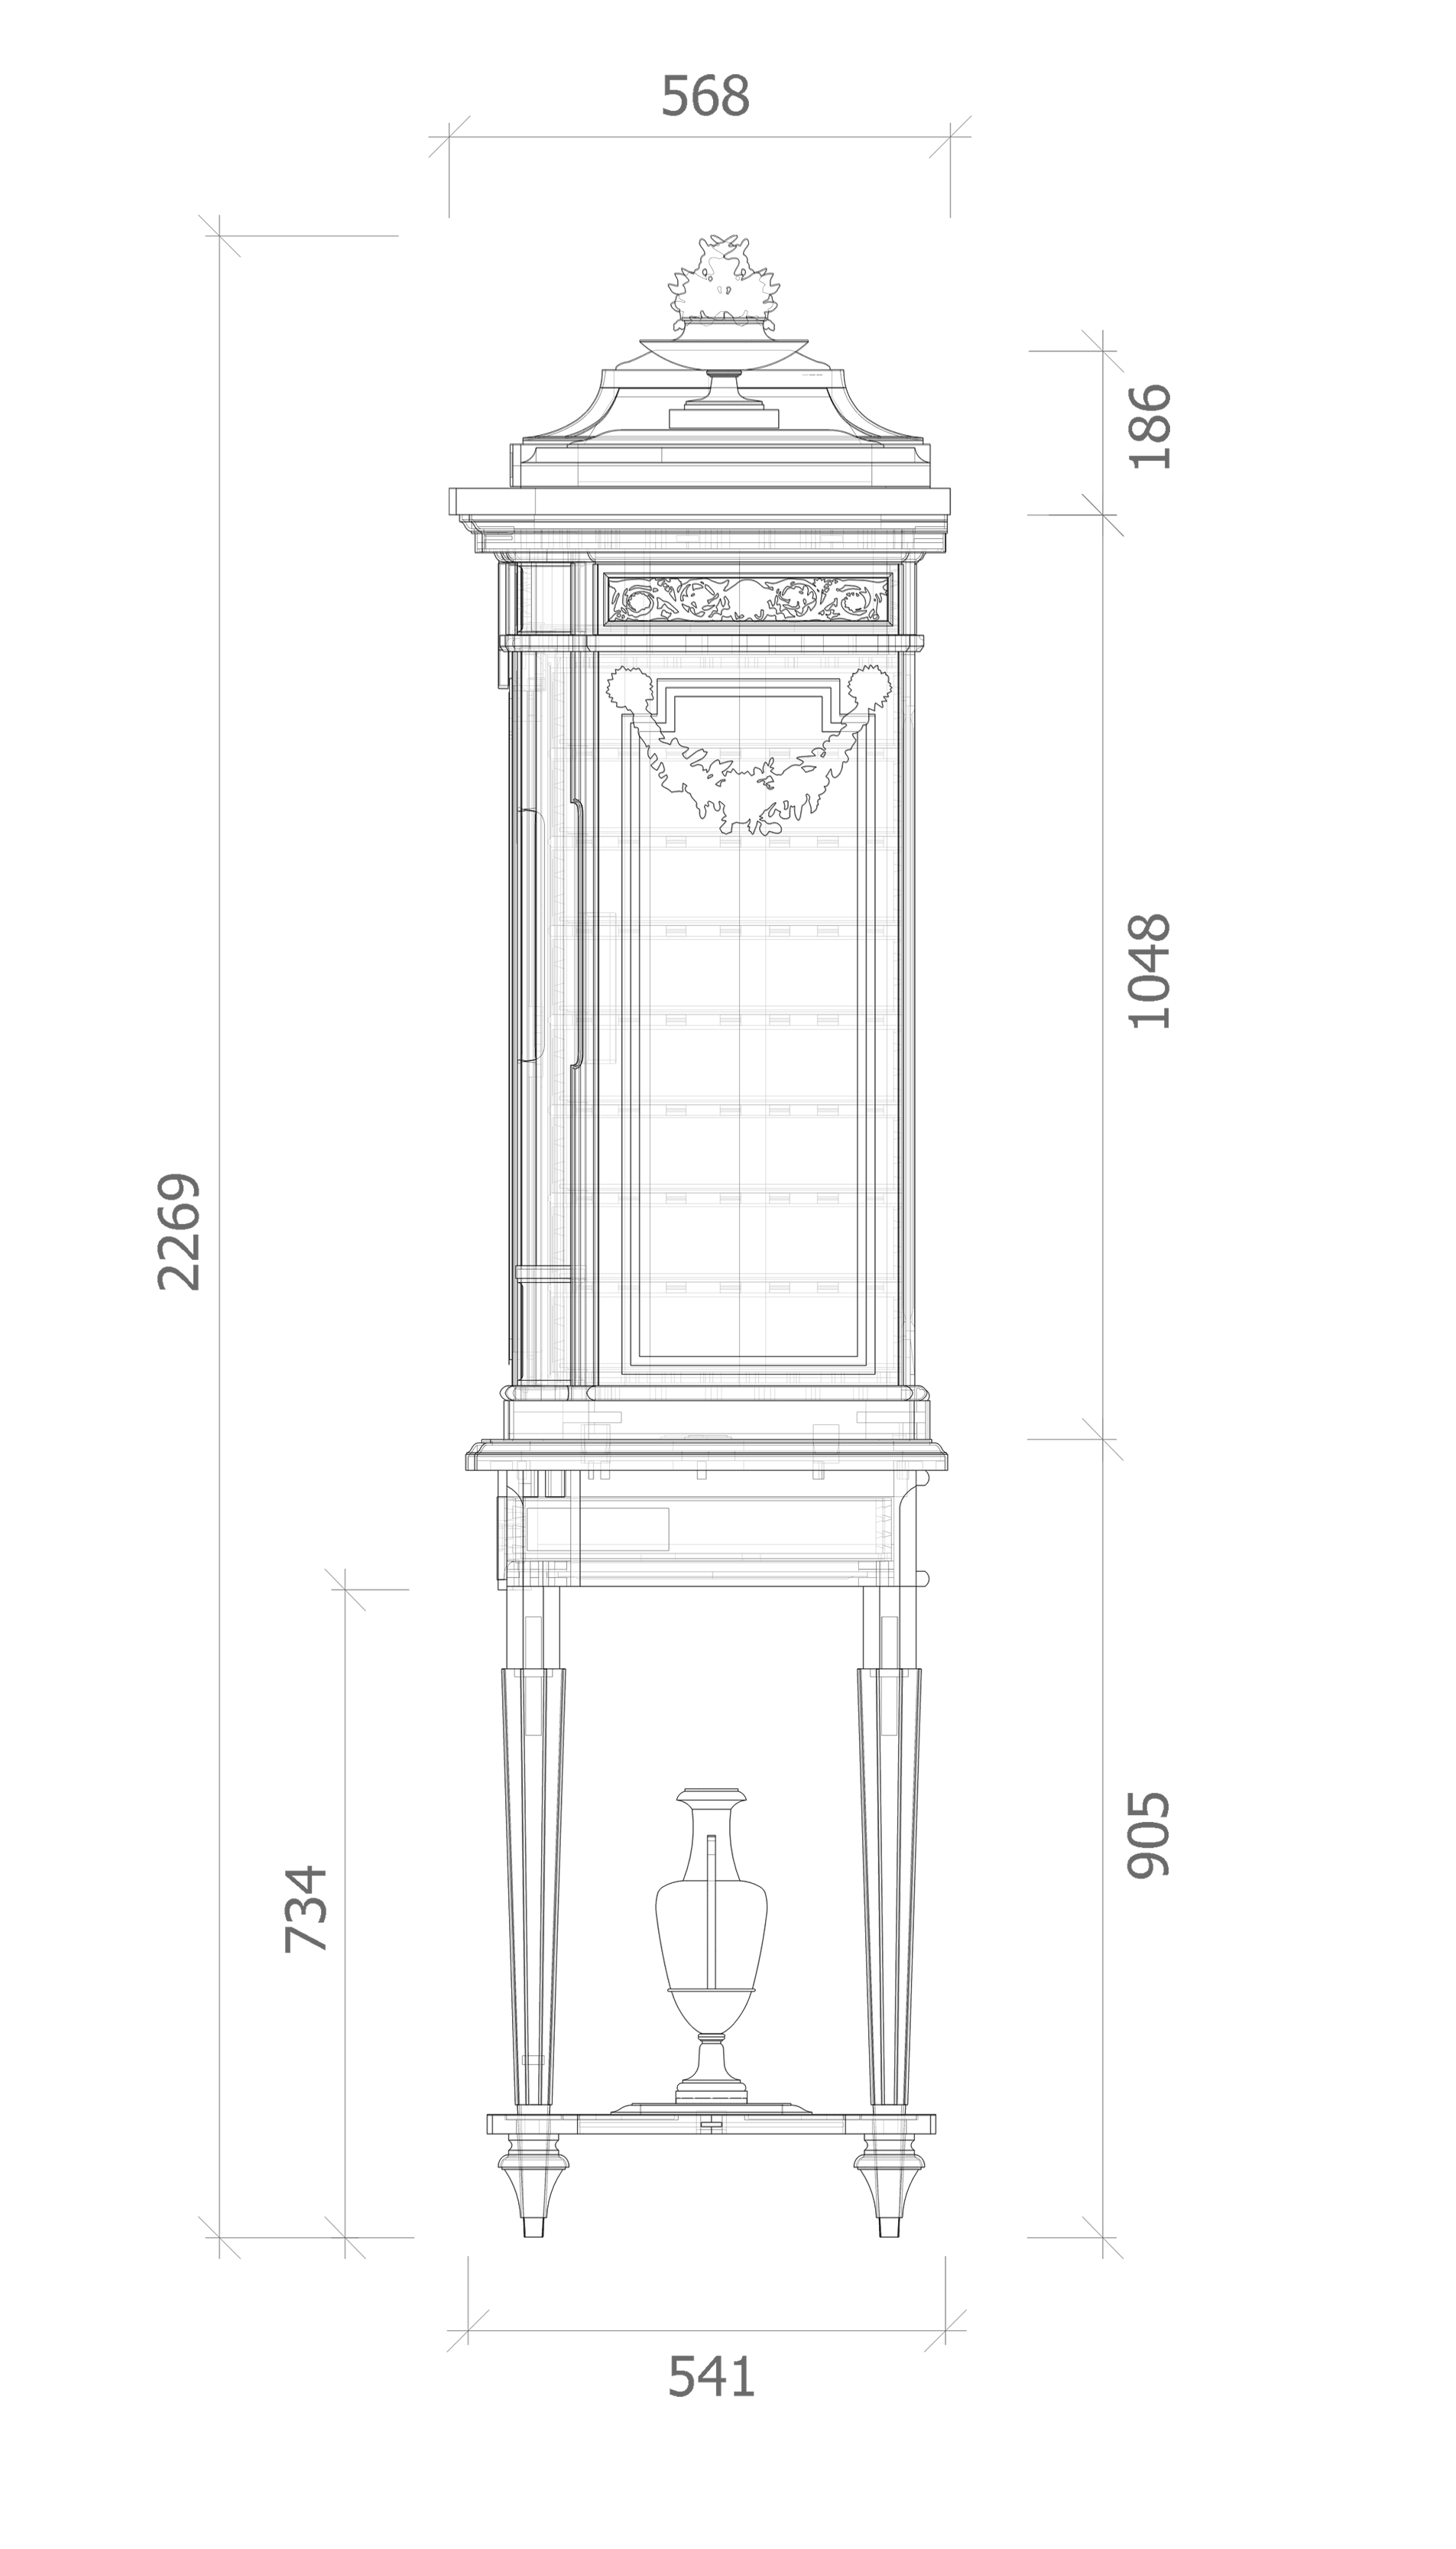 Drawing of side of jewel cabinet with measurements